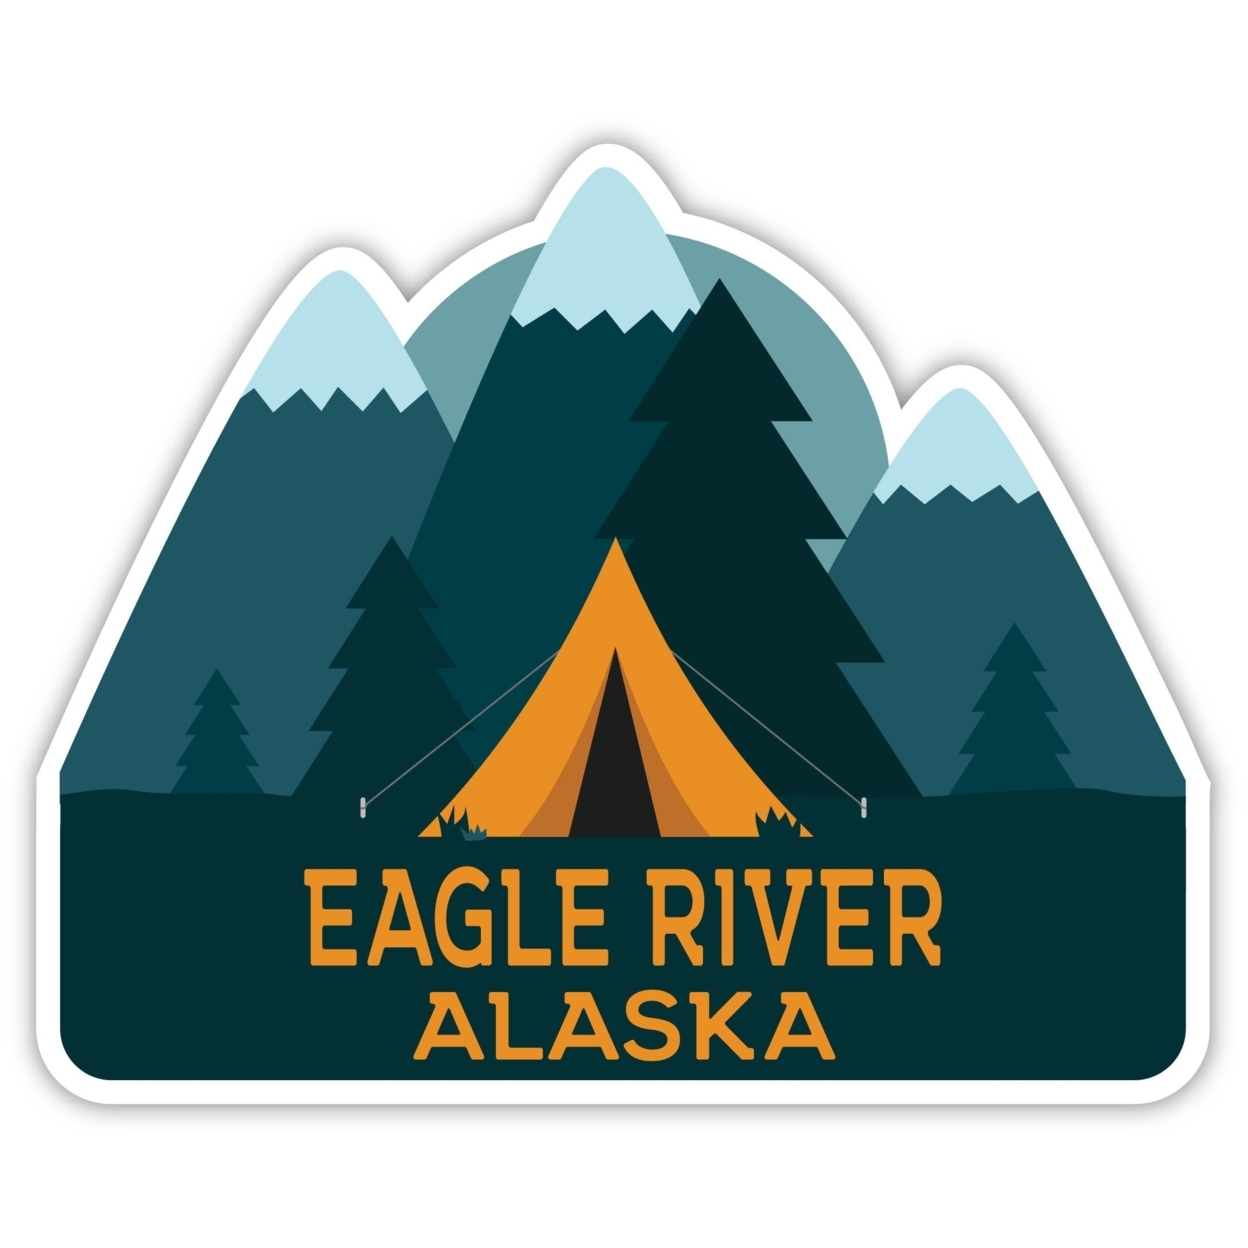 Eagle River Alaska Souvenir Decorative Stickers (Choose Theme And Size) - 4-Pack, 4-Inch, Great Outdoors